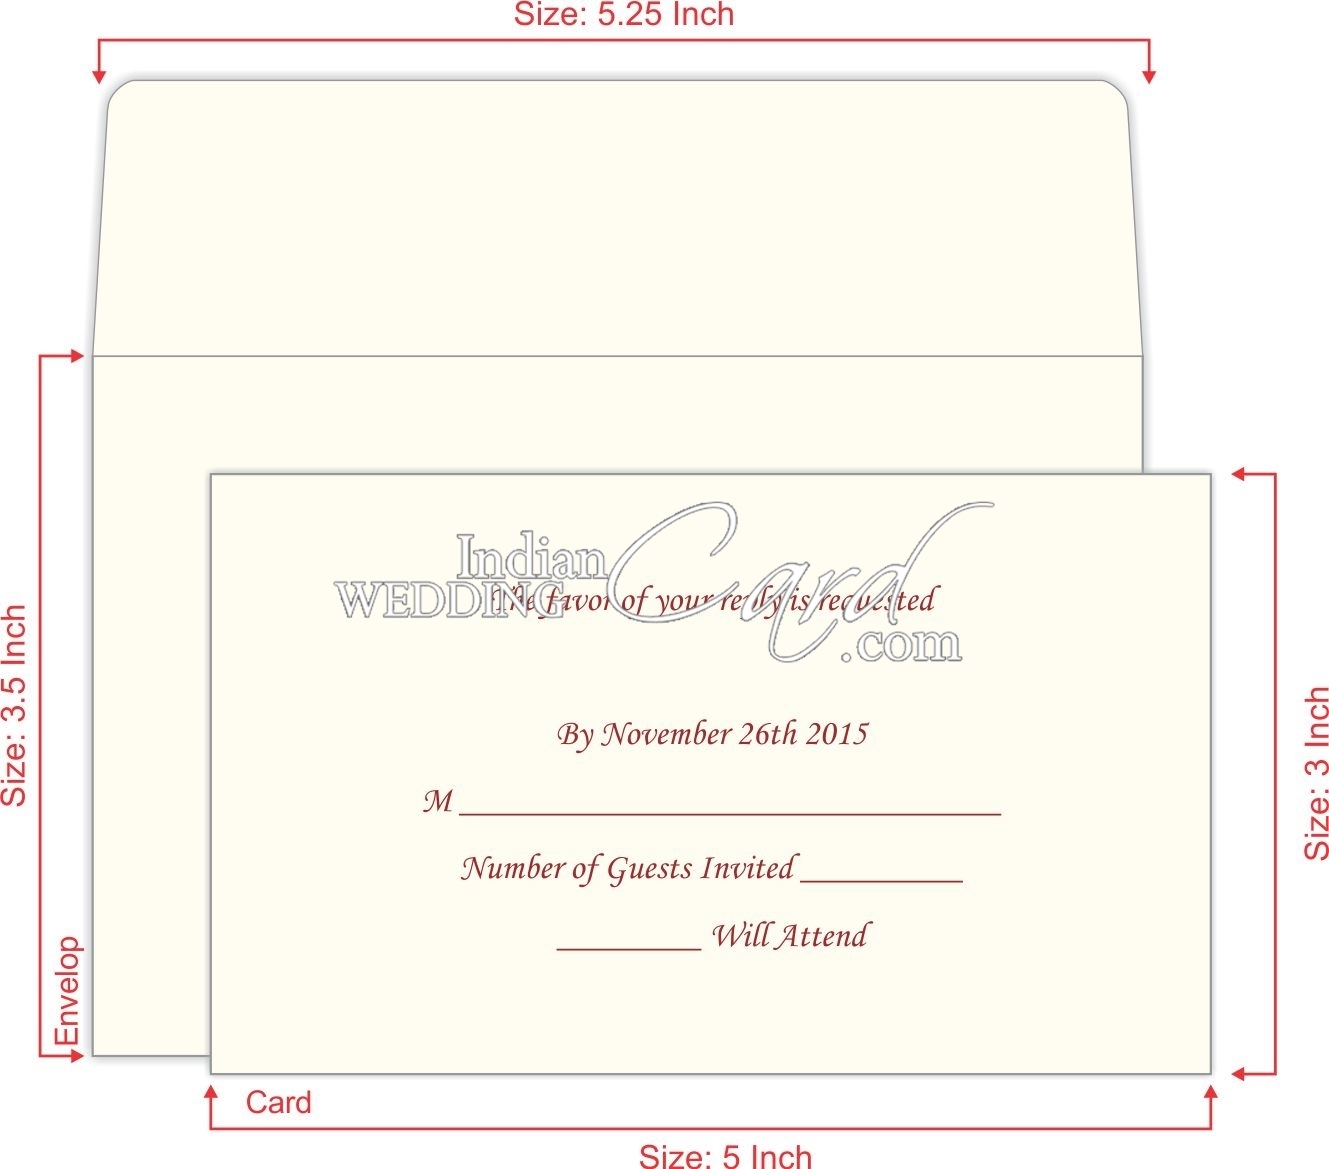 Rsvp Invitations Cards, Indian Wedding Card Rsvp1 Within Wedding Card Size Template